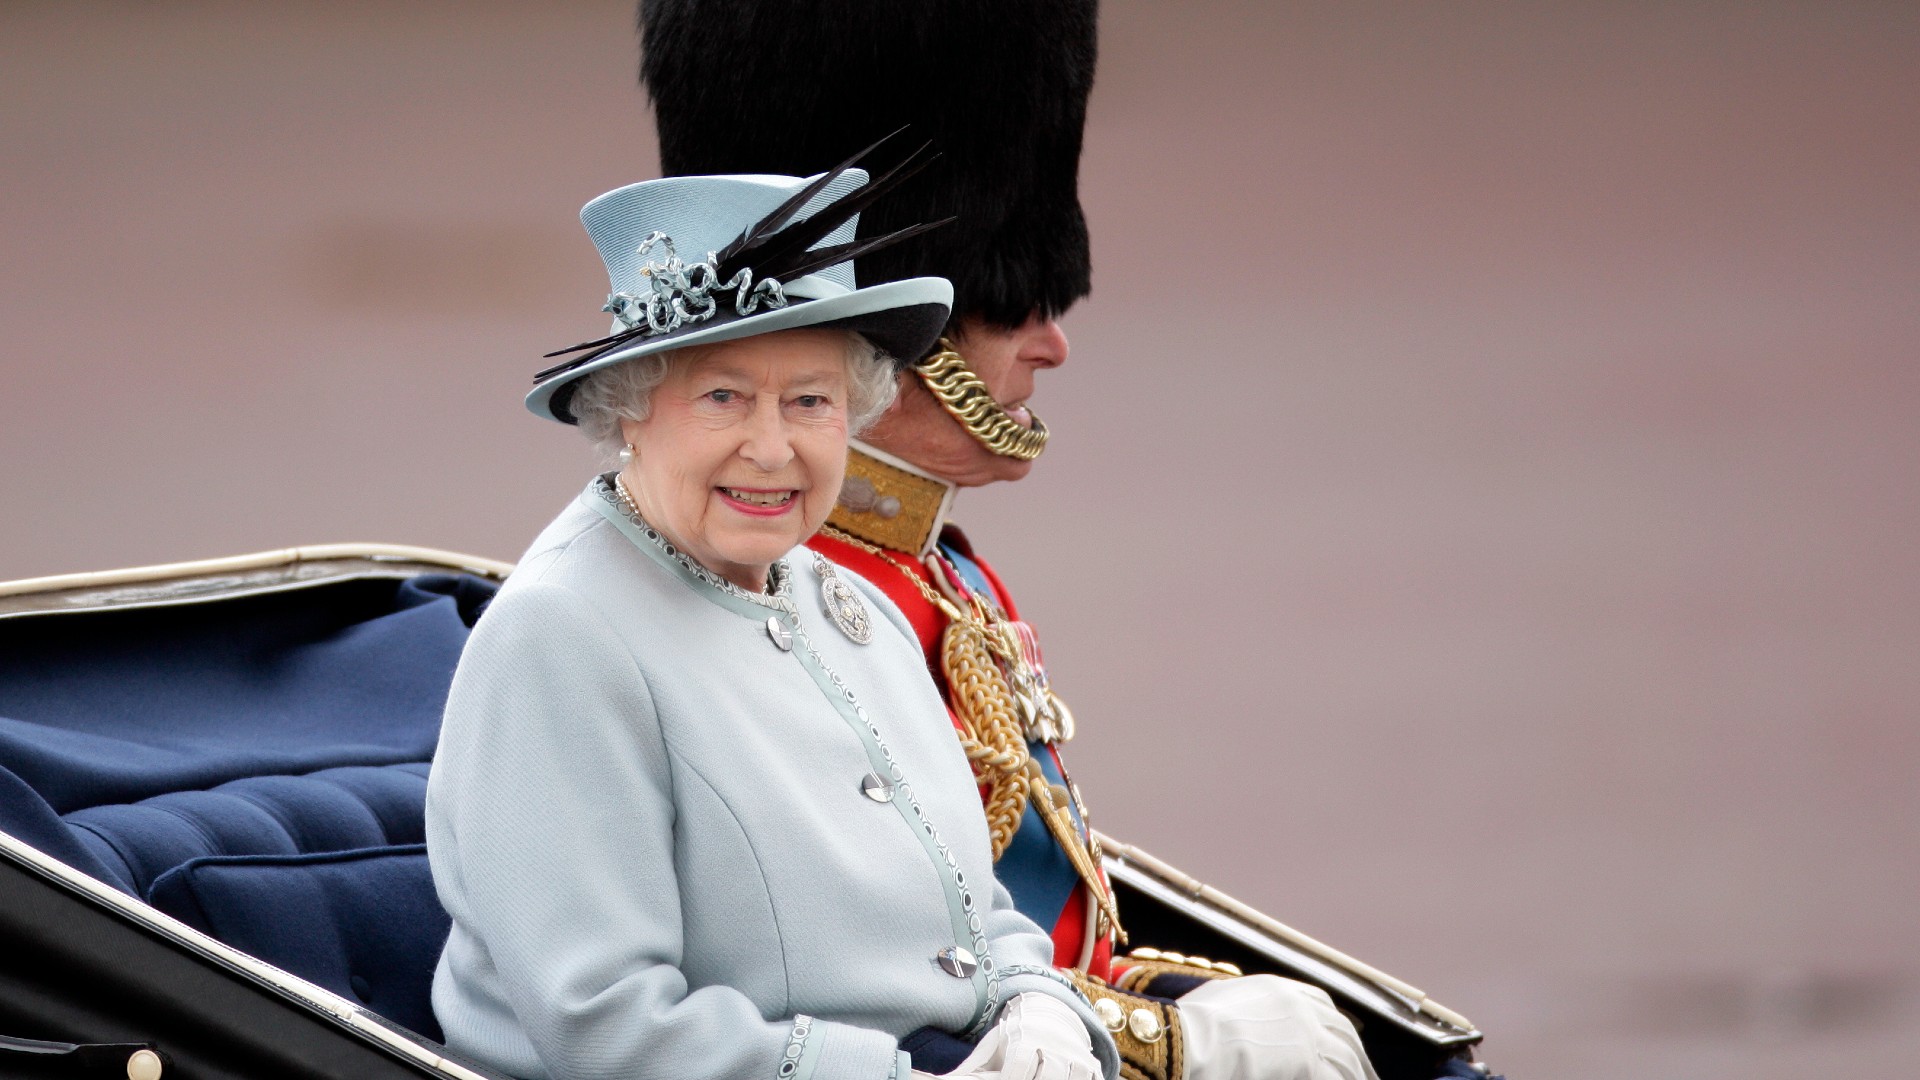 For the First Time in 70 Years, the Queen Won’t Take the Salute at Trooping the Colour